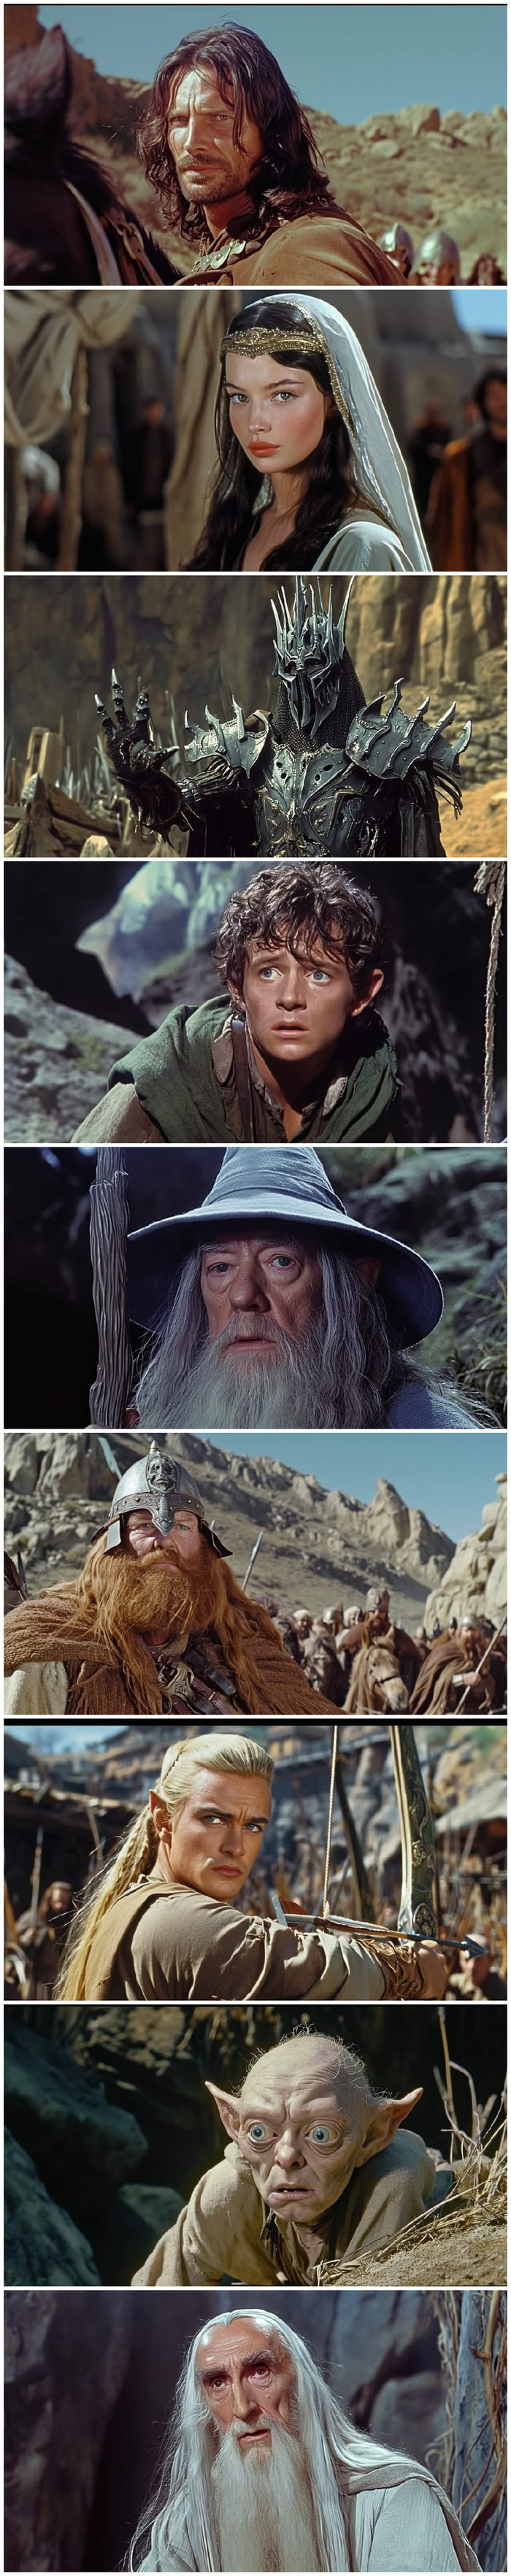 The 1950's The Lord of the Rings